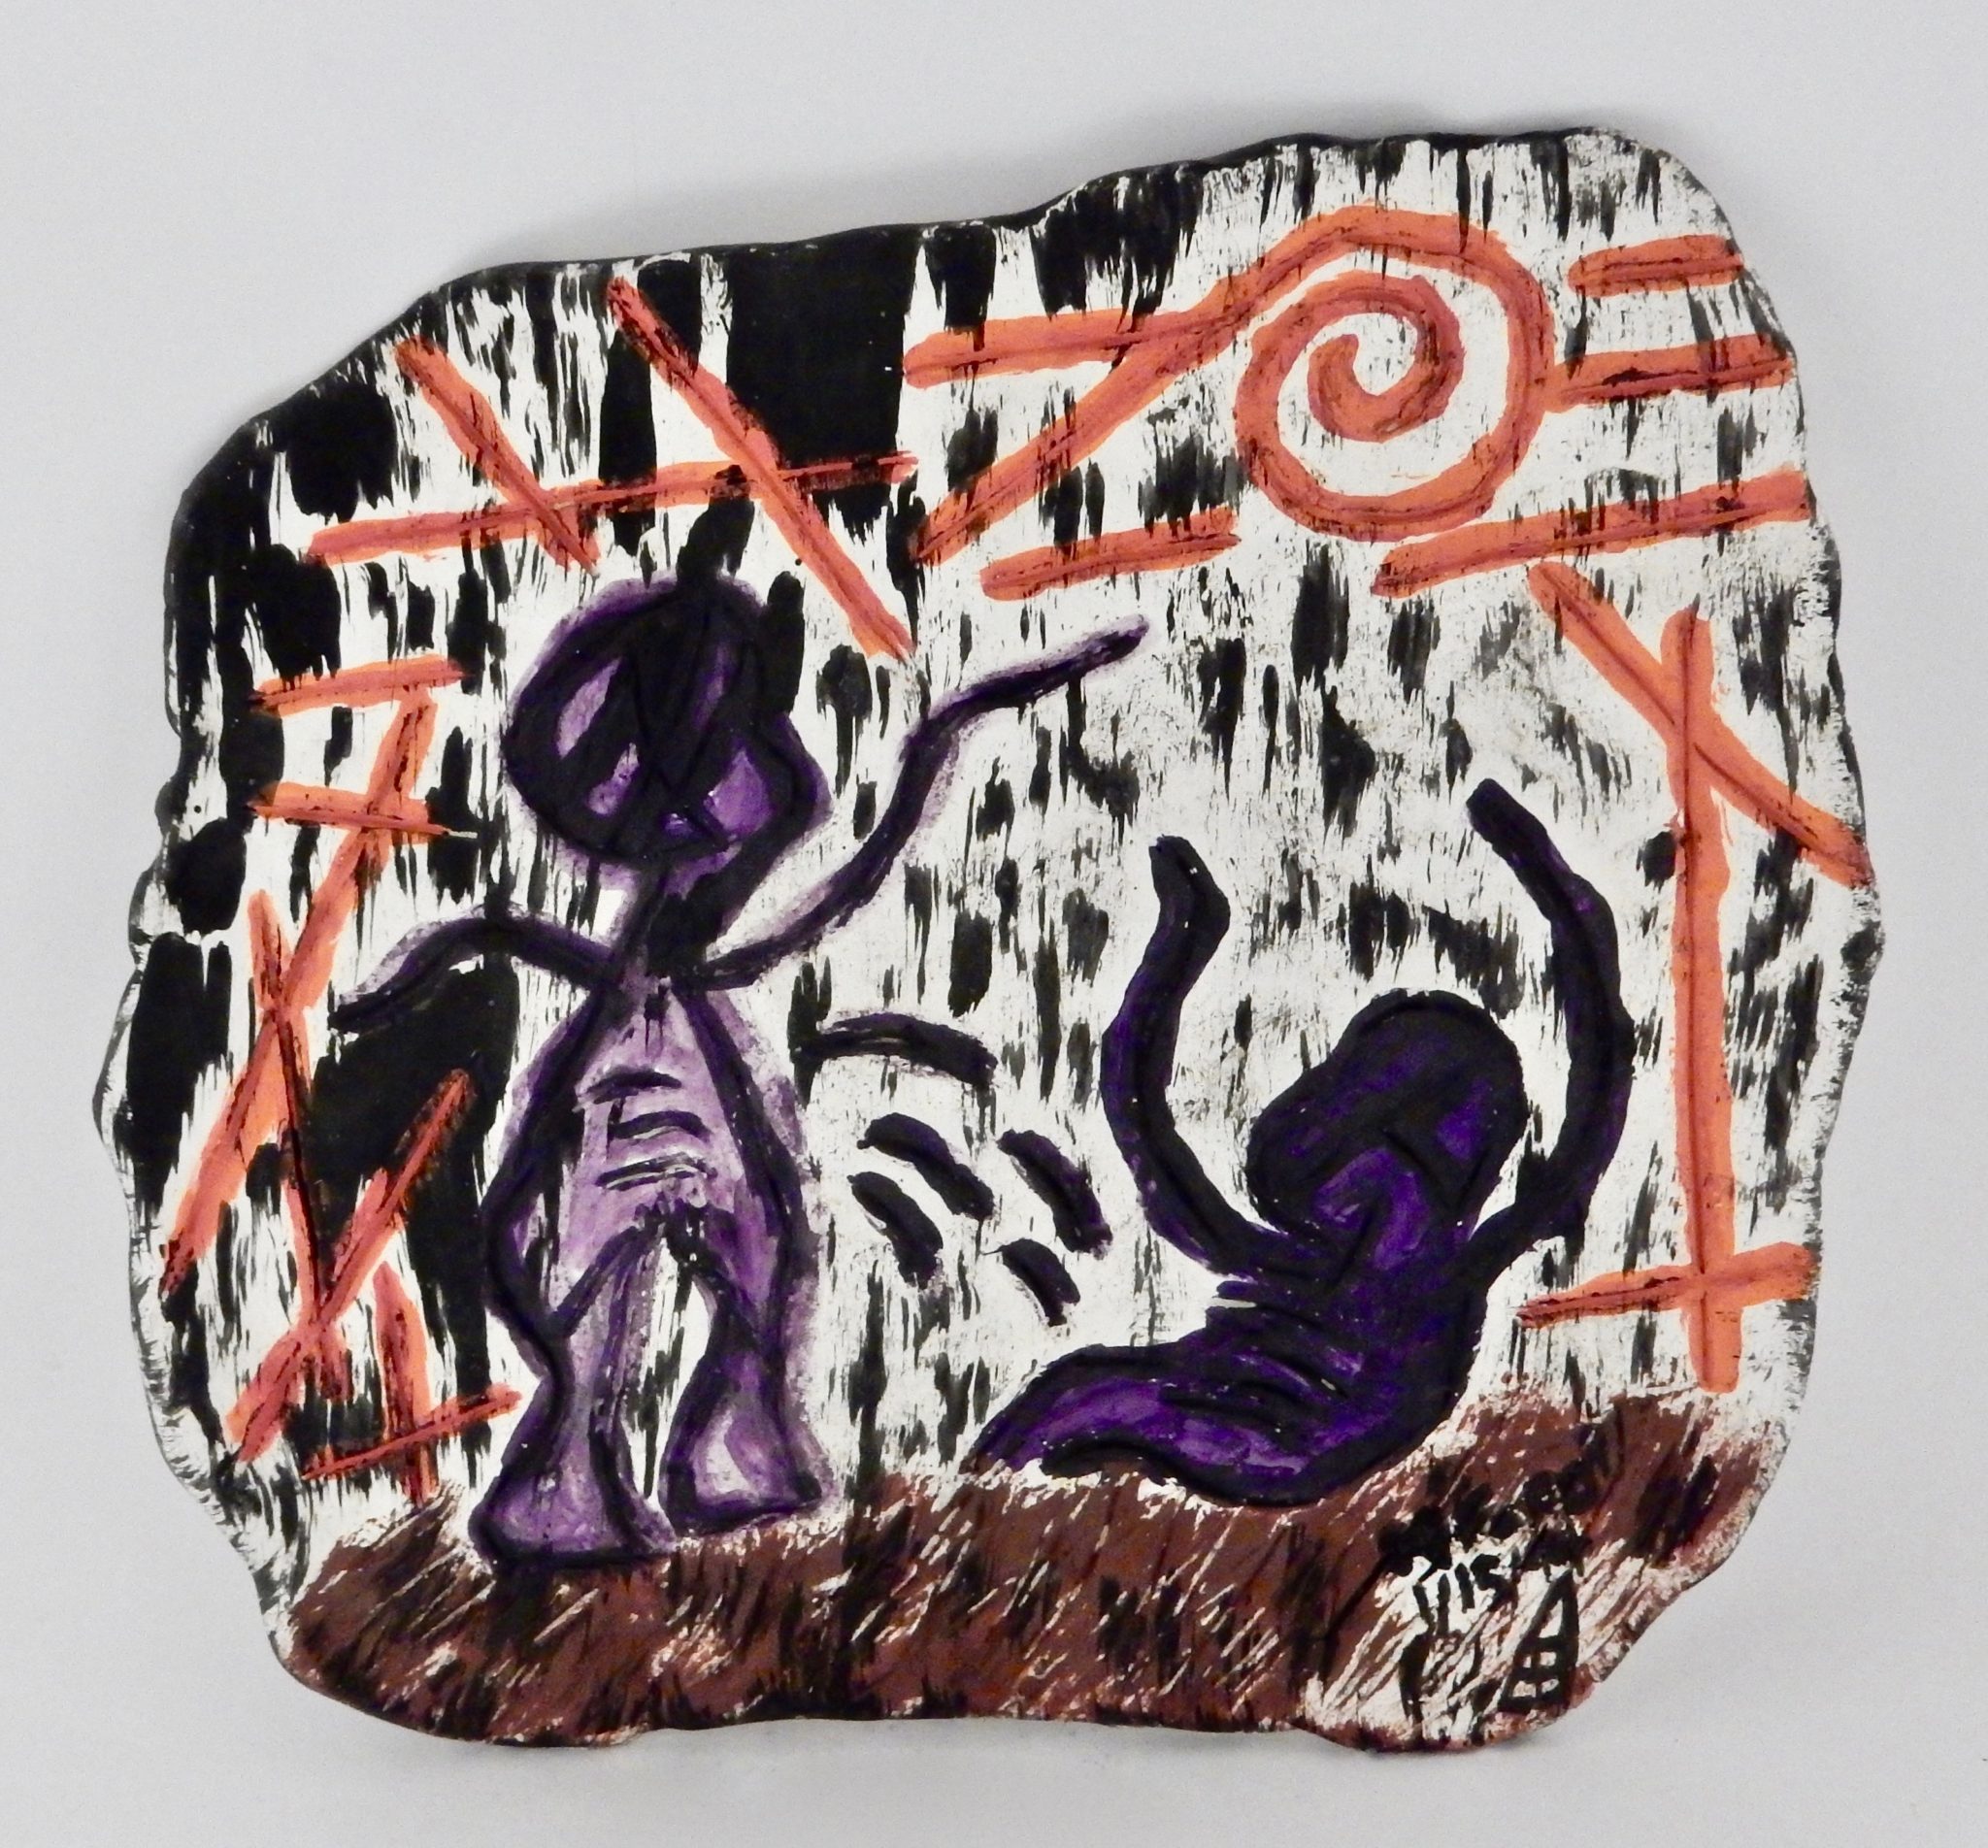 Two figures on ceramic plaque by Harvey Ford, 1994